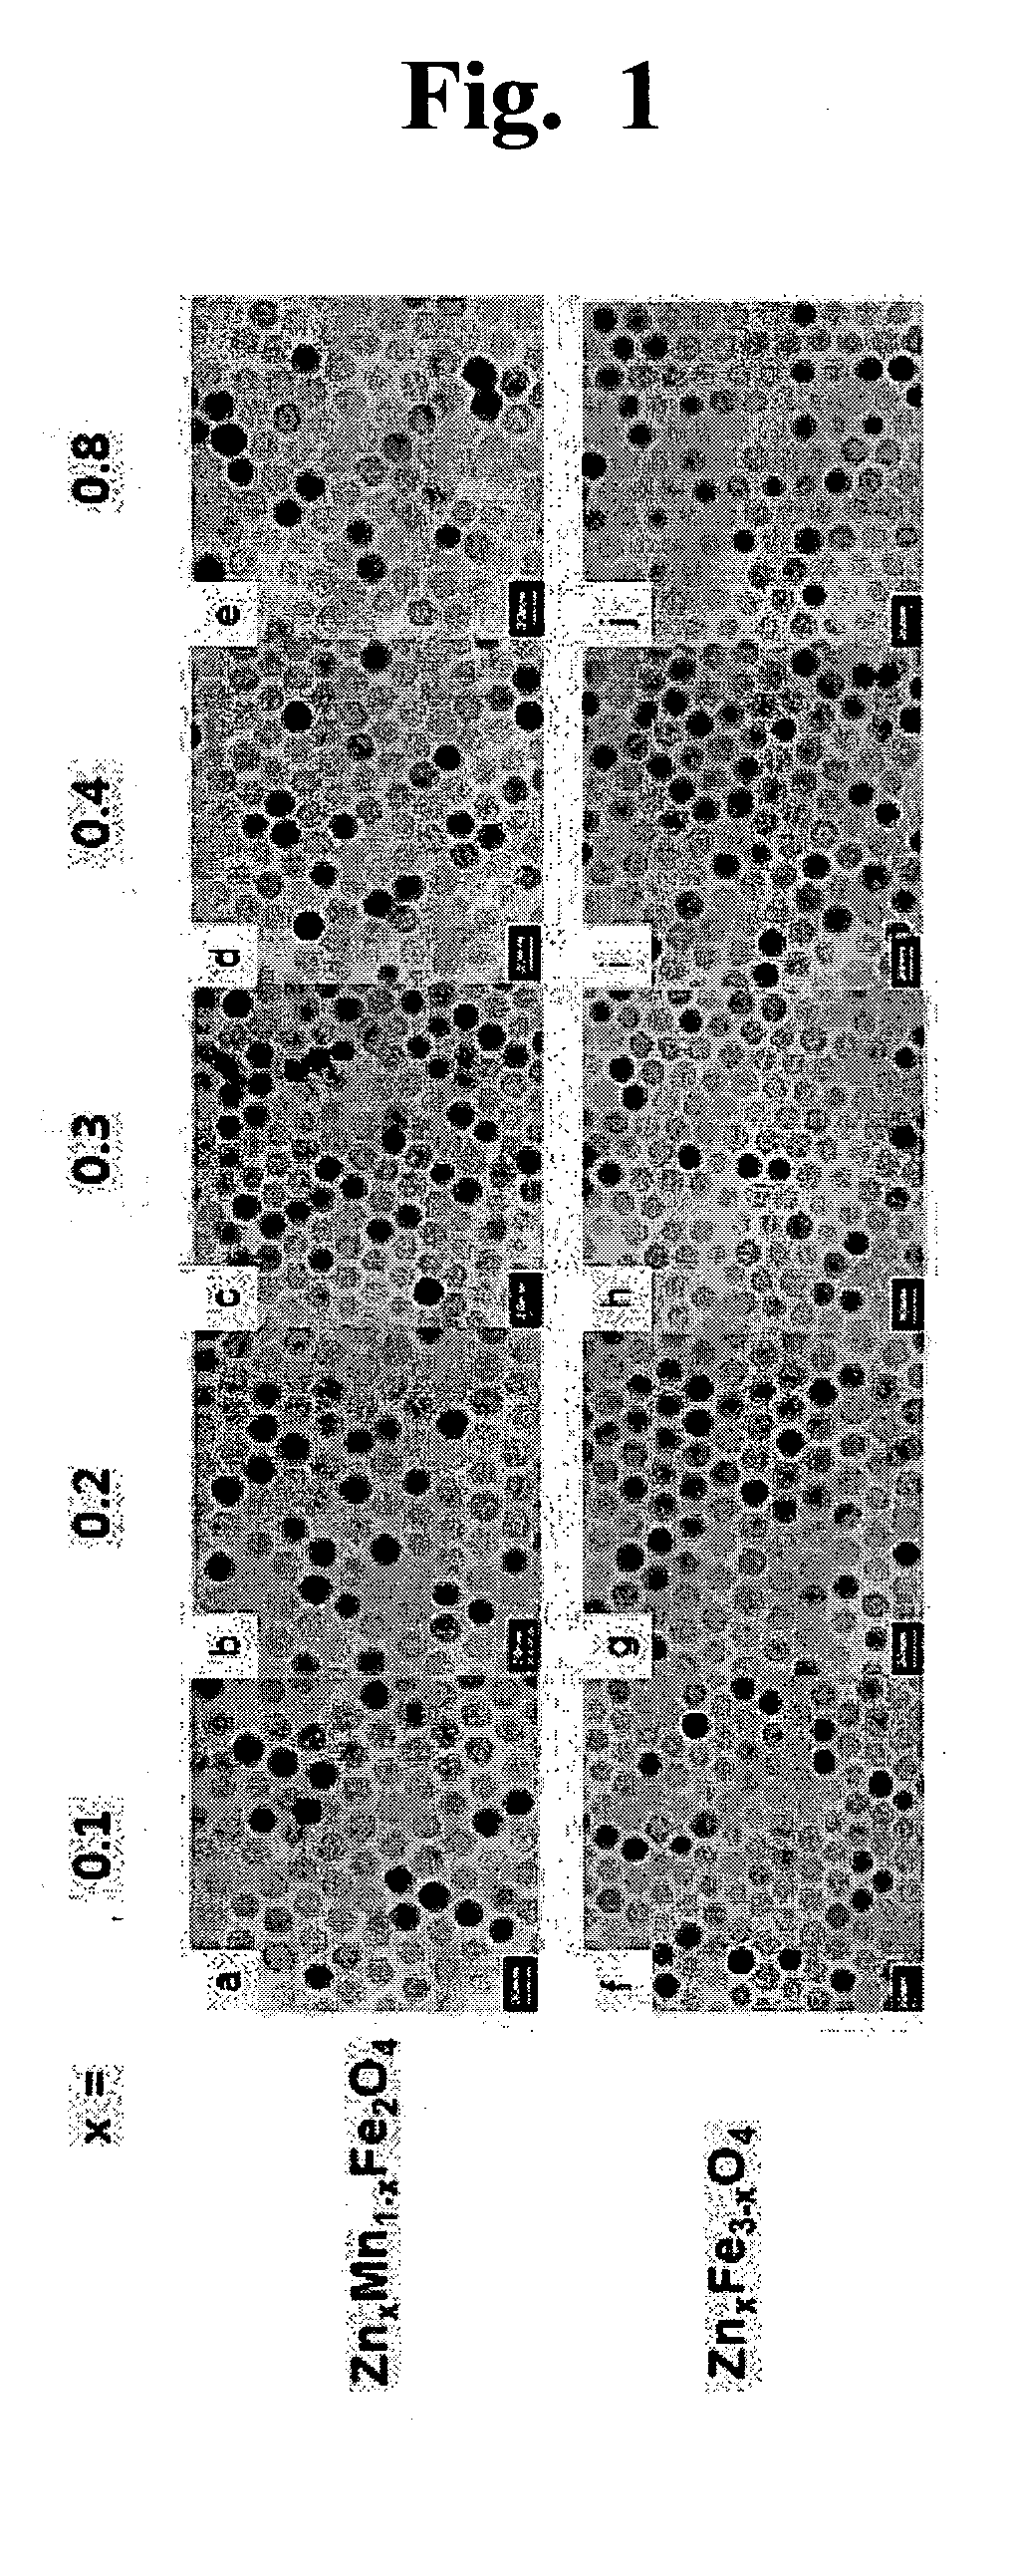 Methods for Controlling Heat Generation of Magnetic Nanoparticles and Heat Generating Nanomaterials